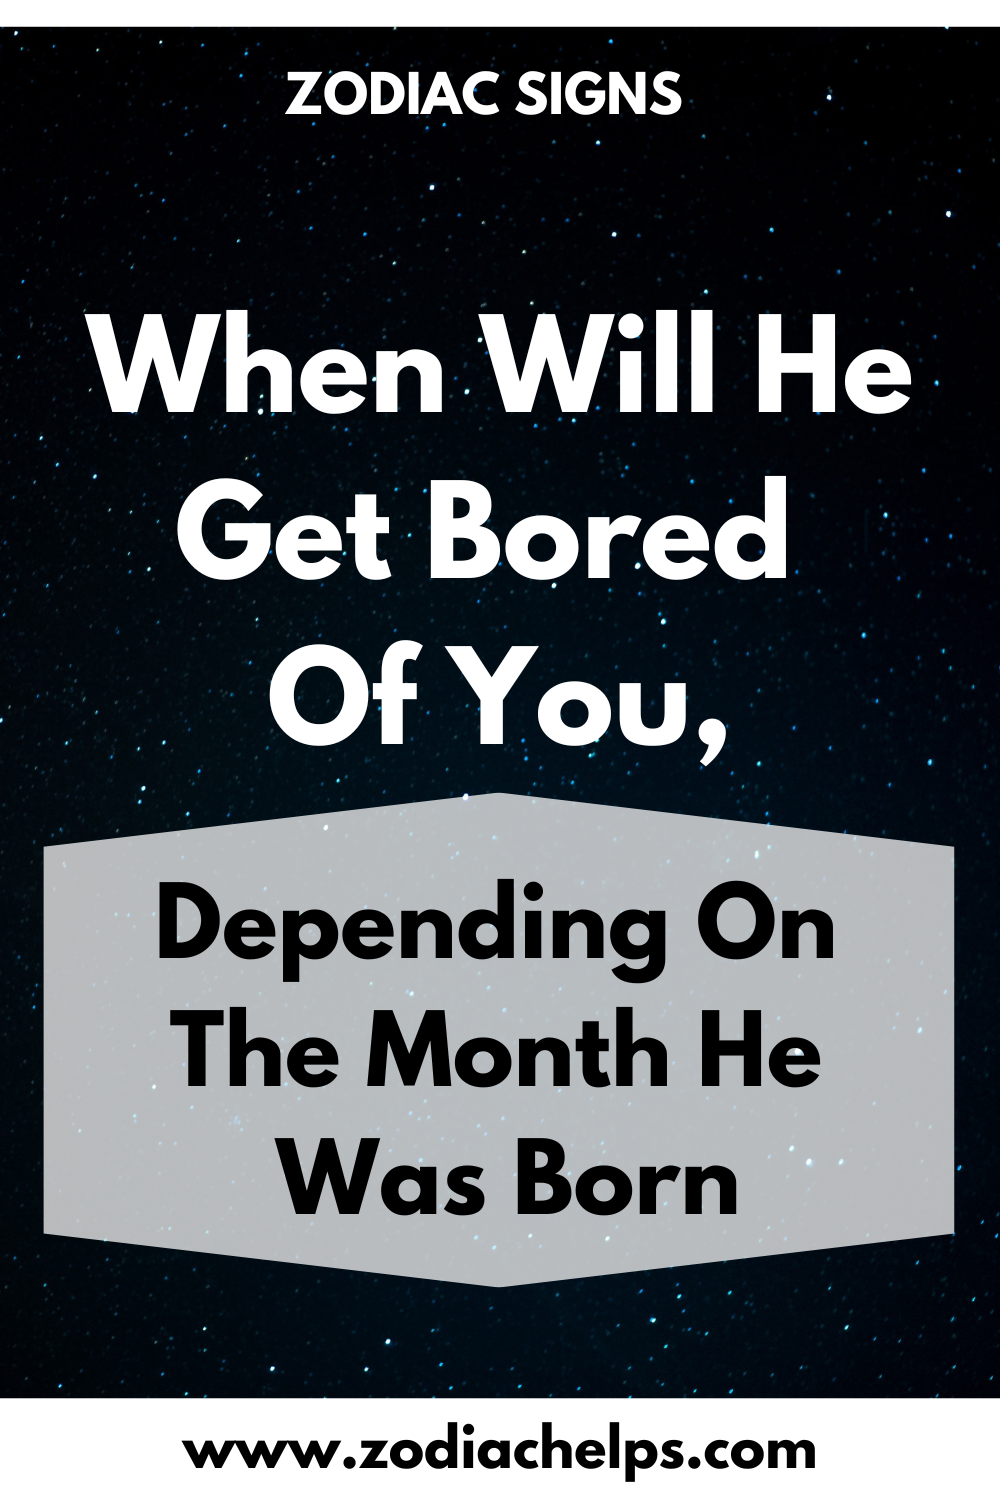 When Will He Get Bored Of You, Depending On The Month He Was Born